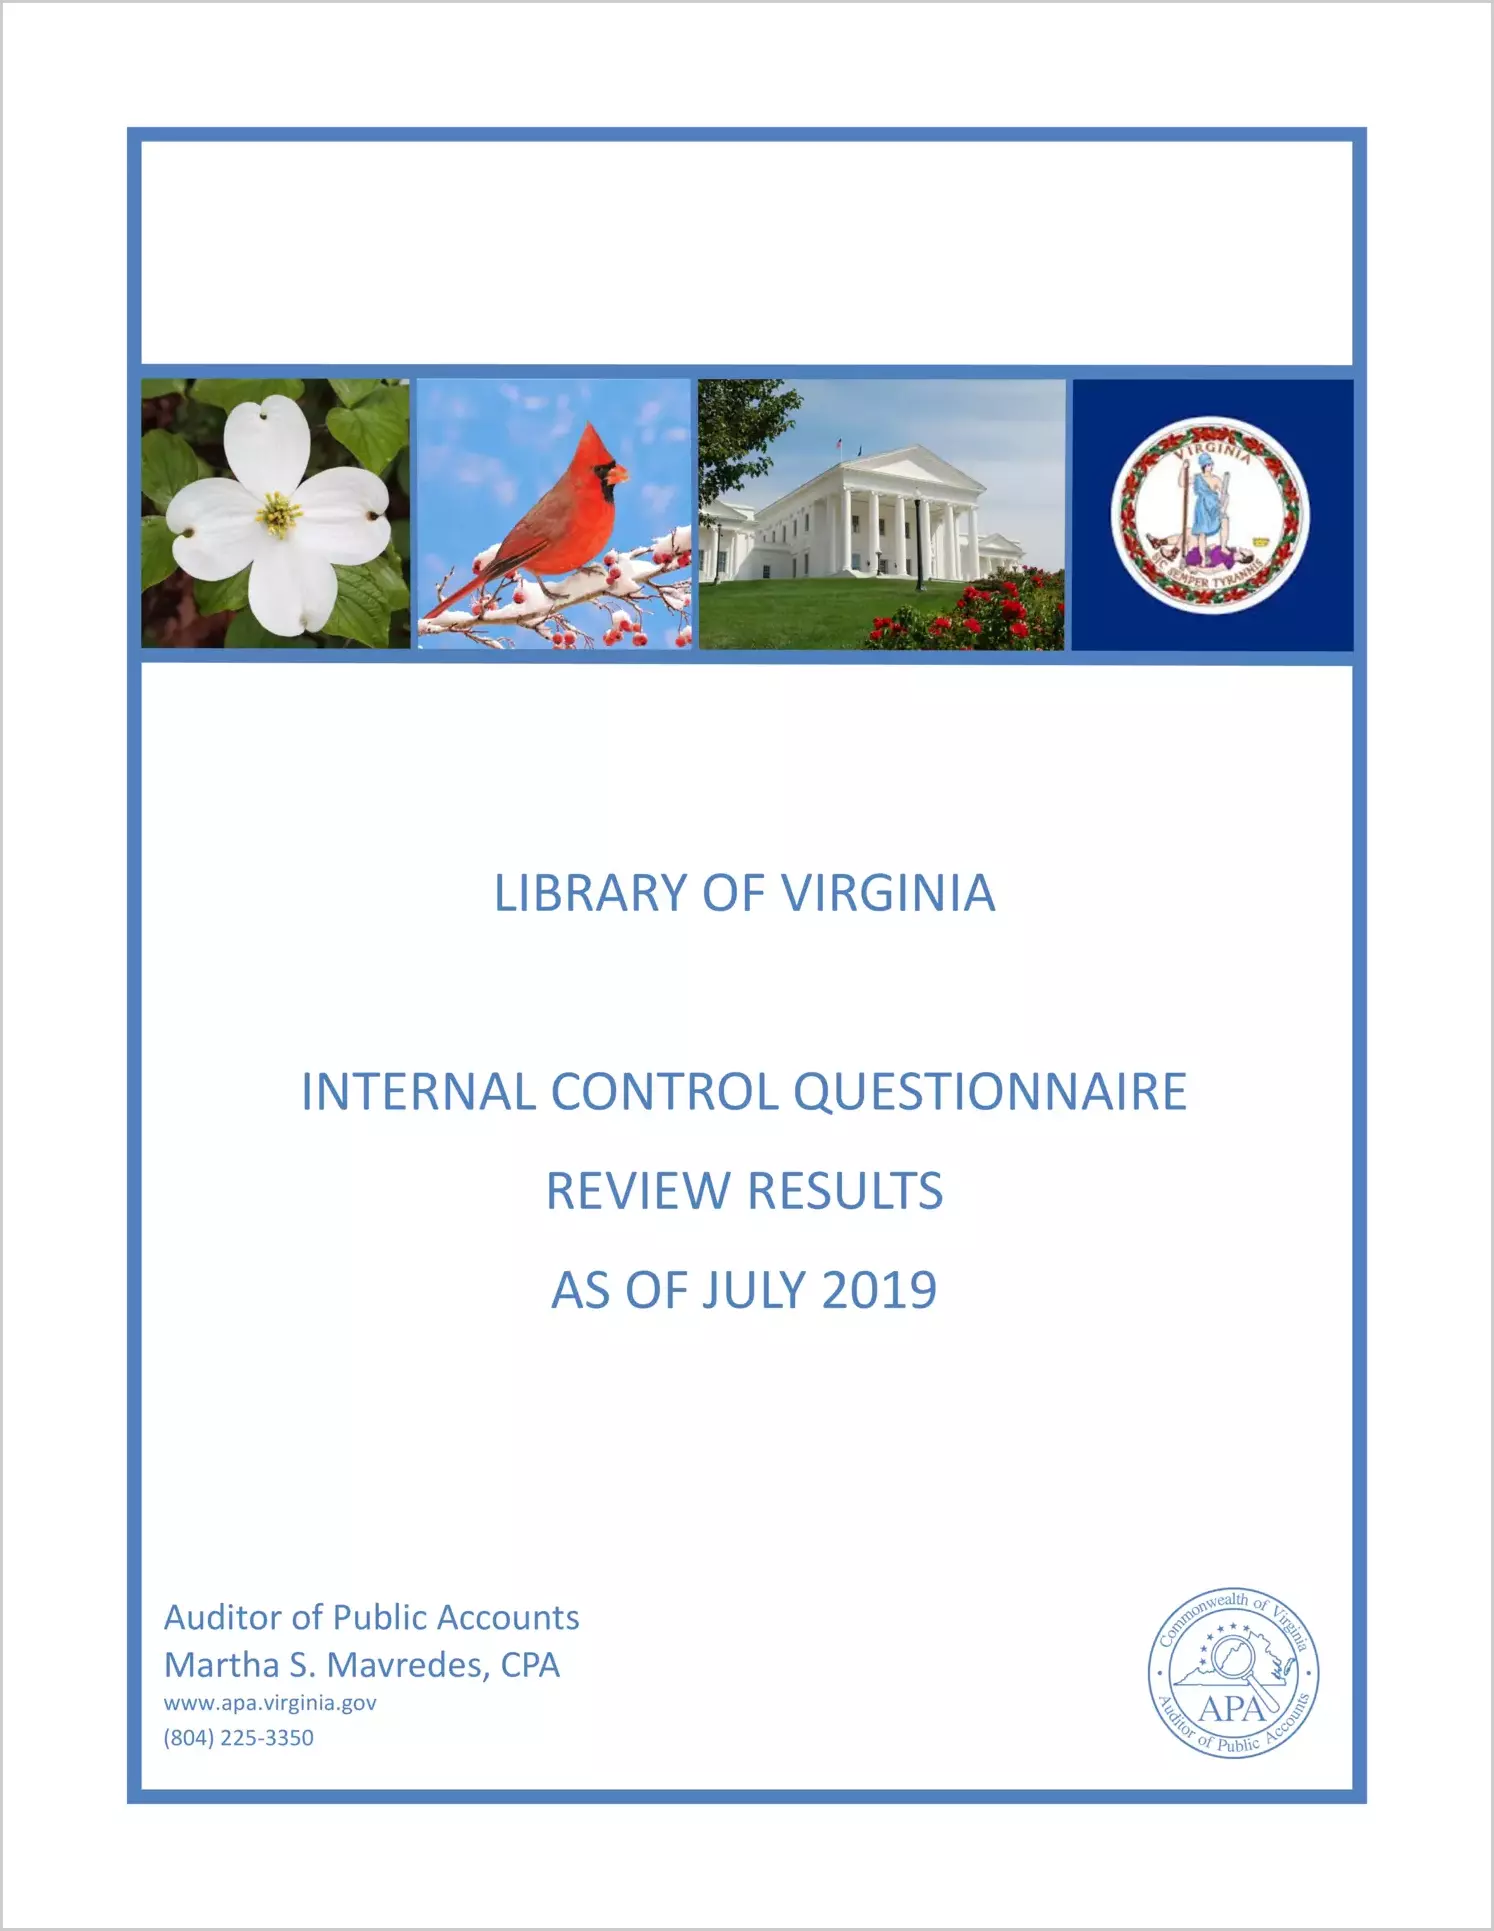 Library of Virginia Internal Control Questionnaire Review Results as of July 2019